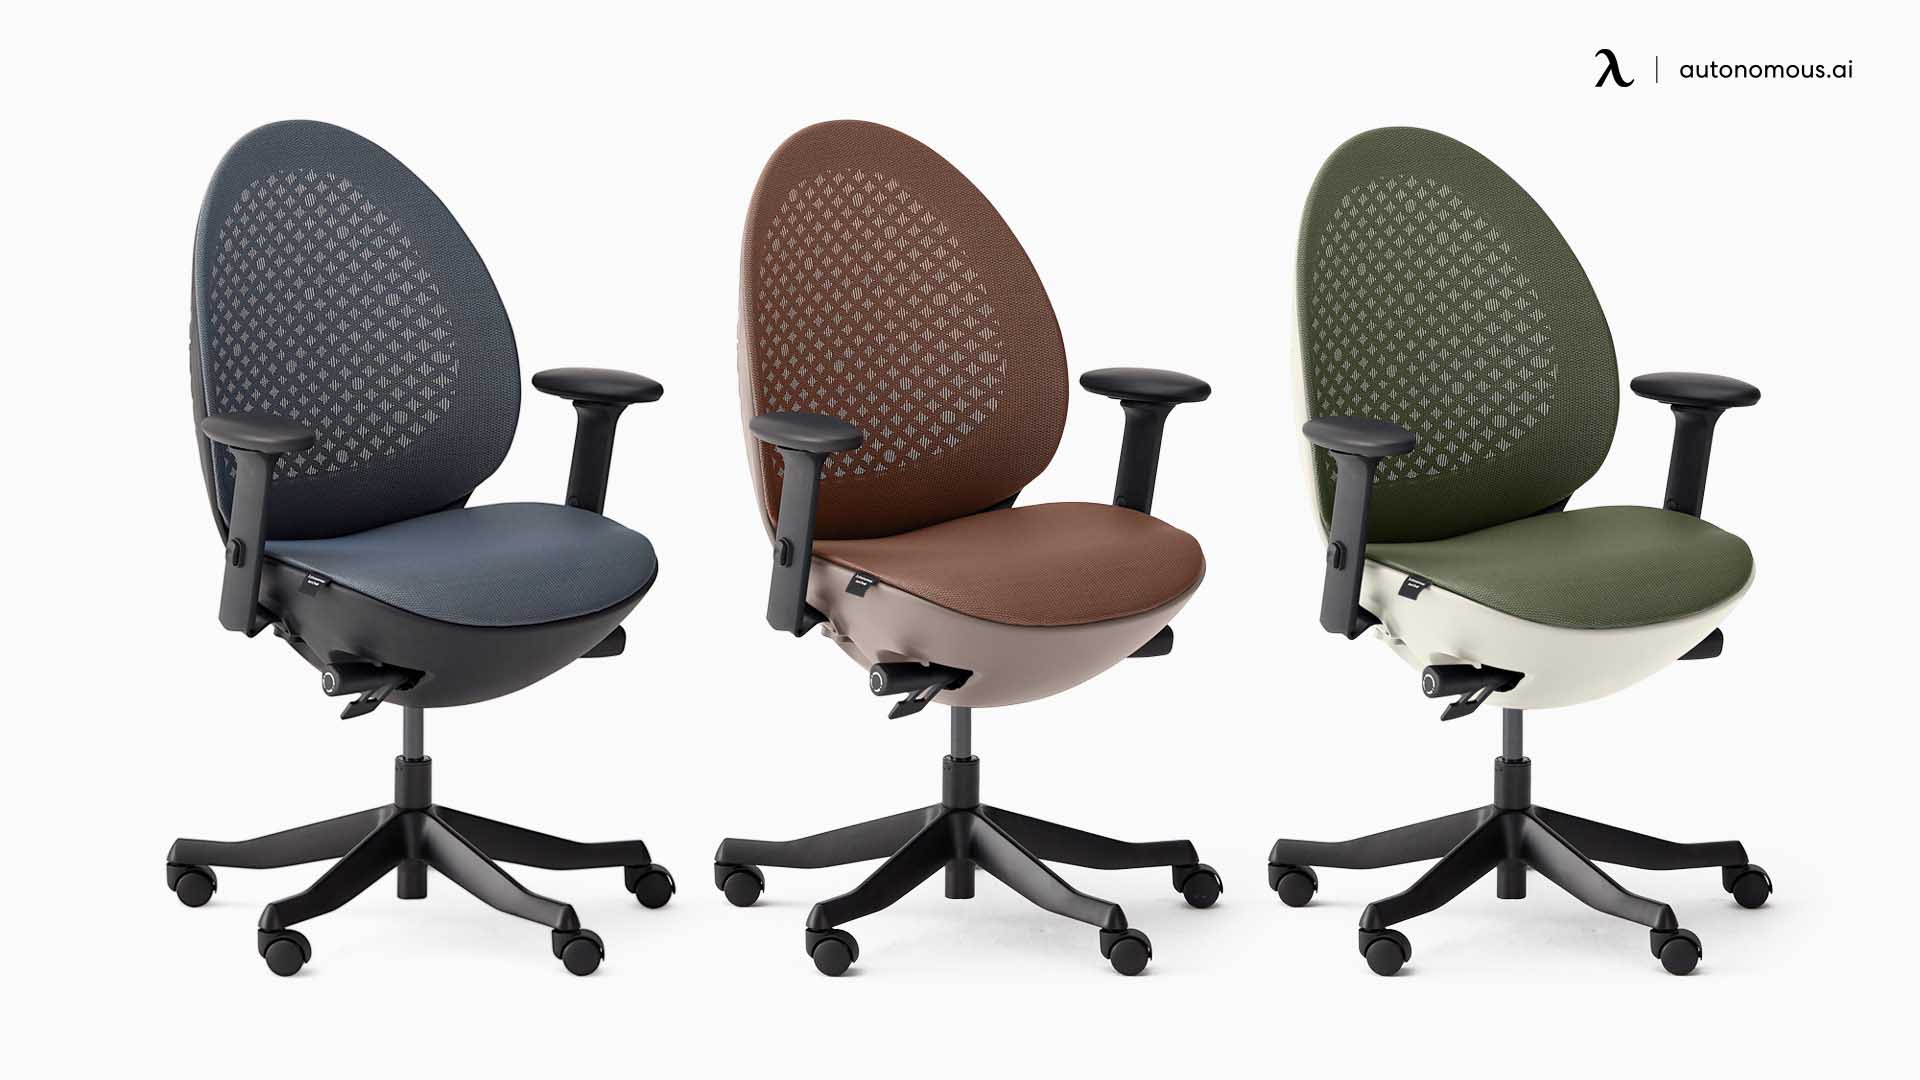 12 Best Active Sitting Chairs to Improve Your Posture & Health